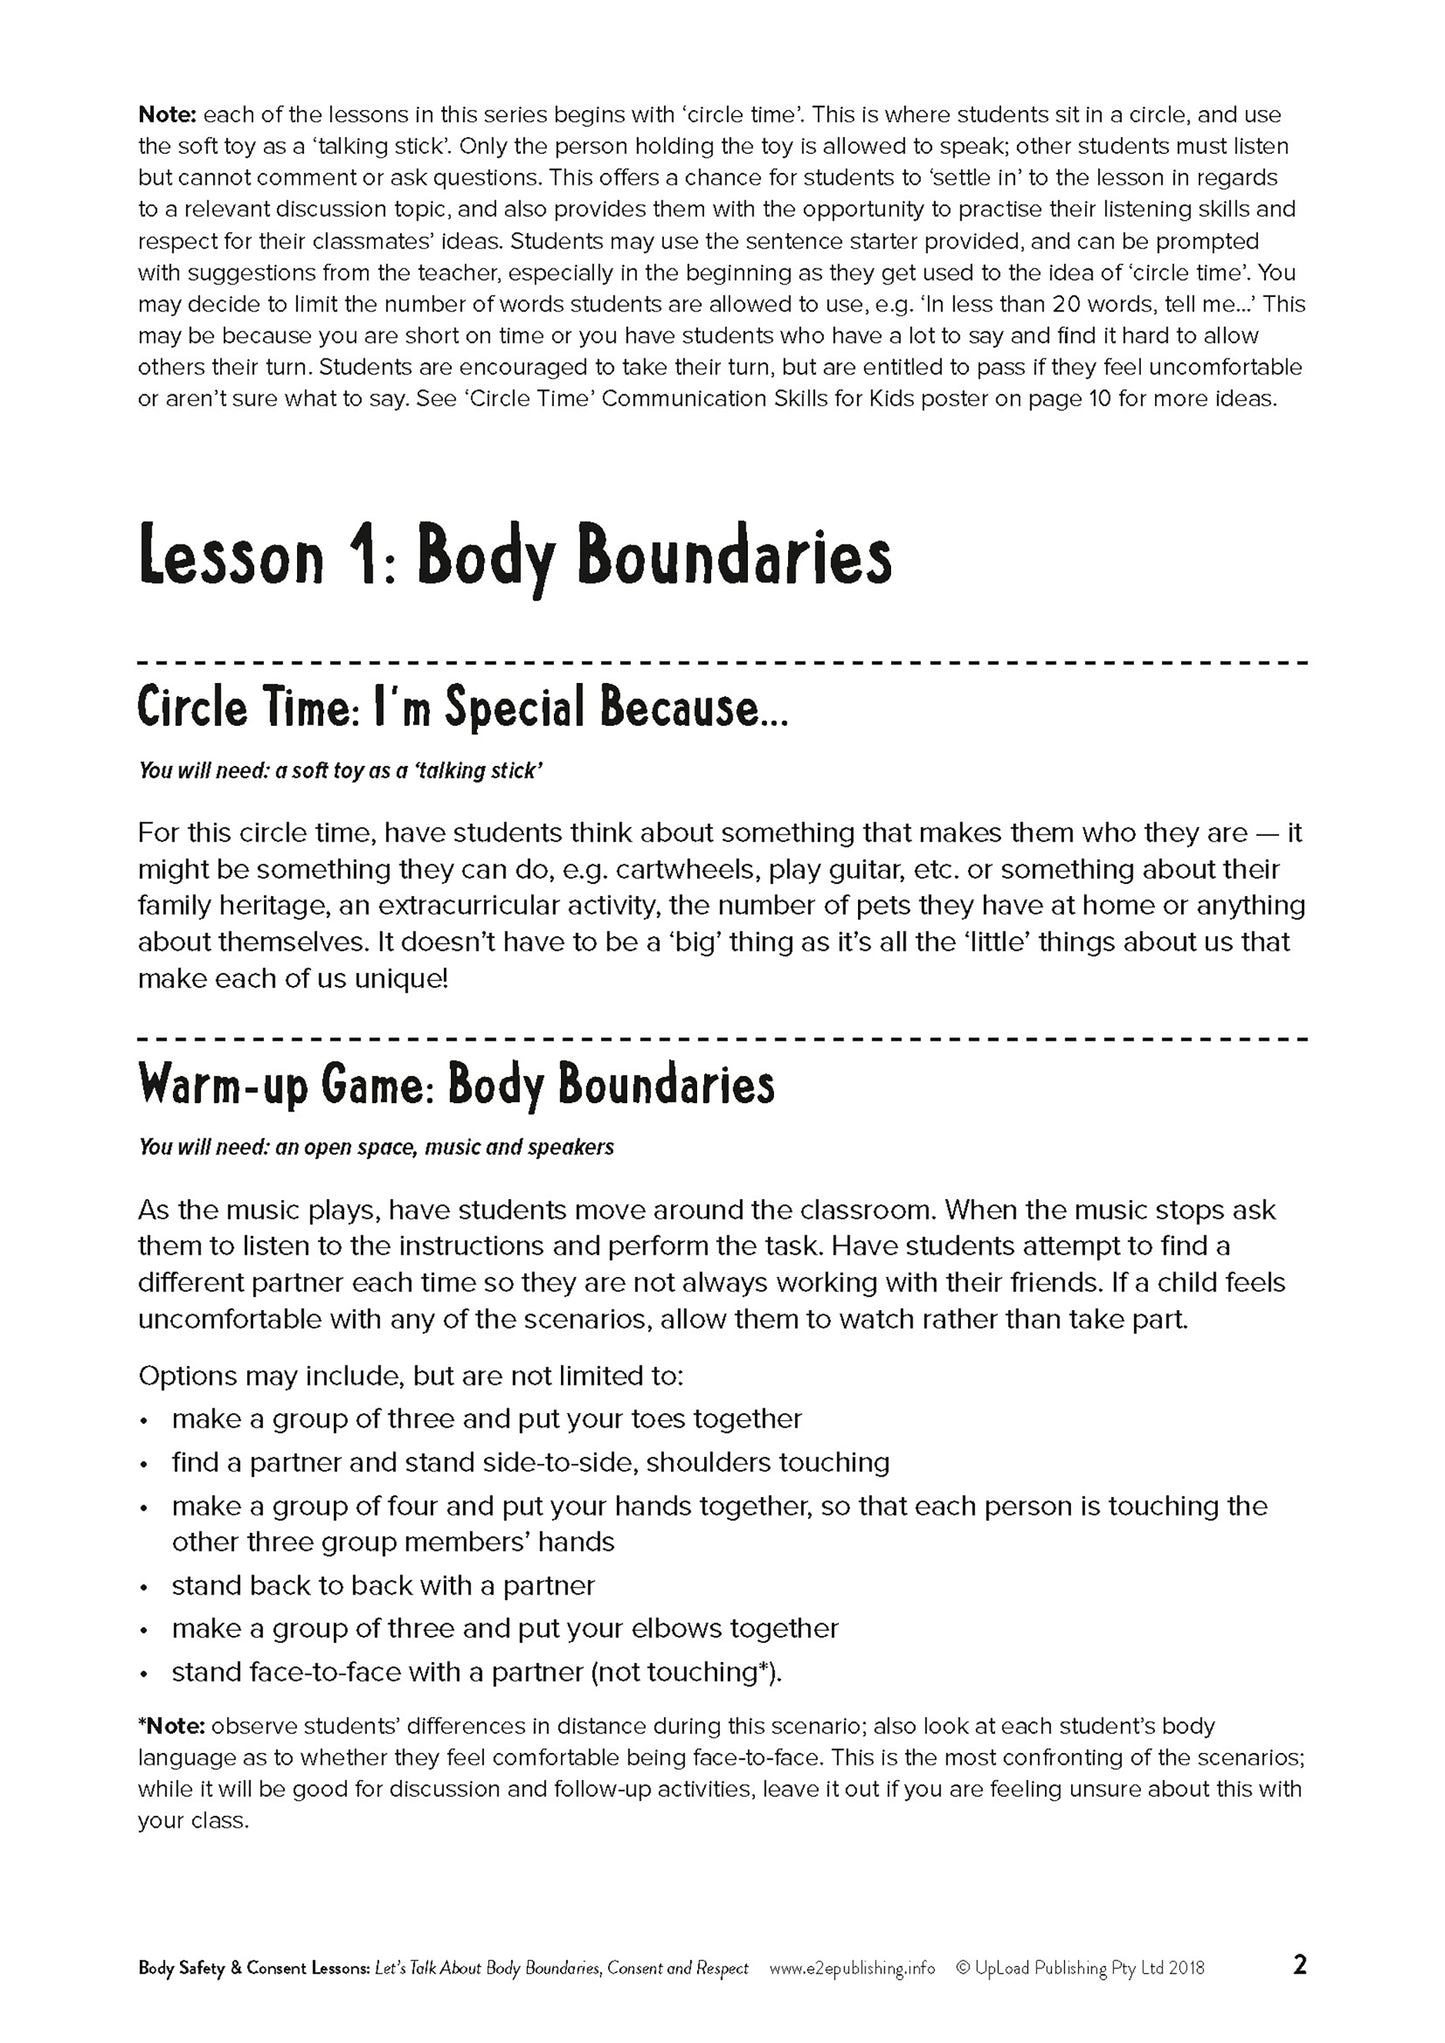 Lesson Plans for Value BUNDLES: Body Safety & Consent